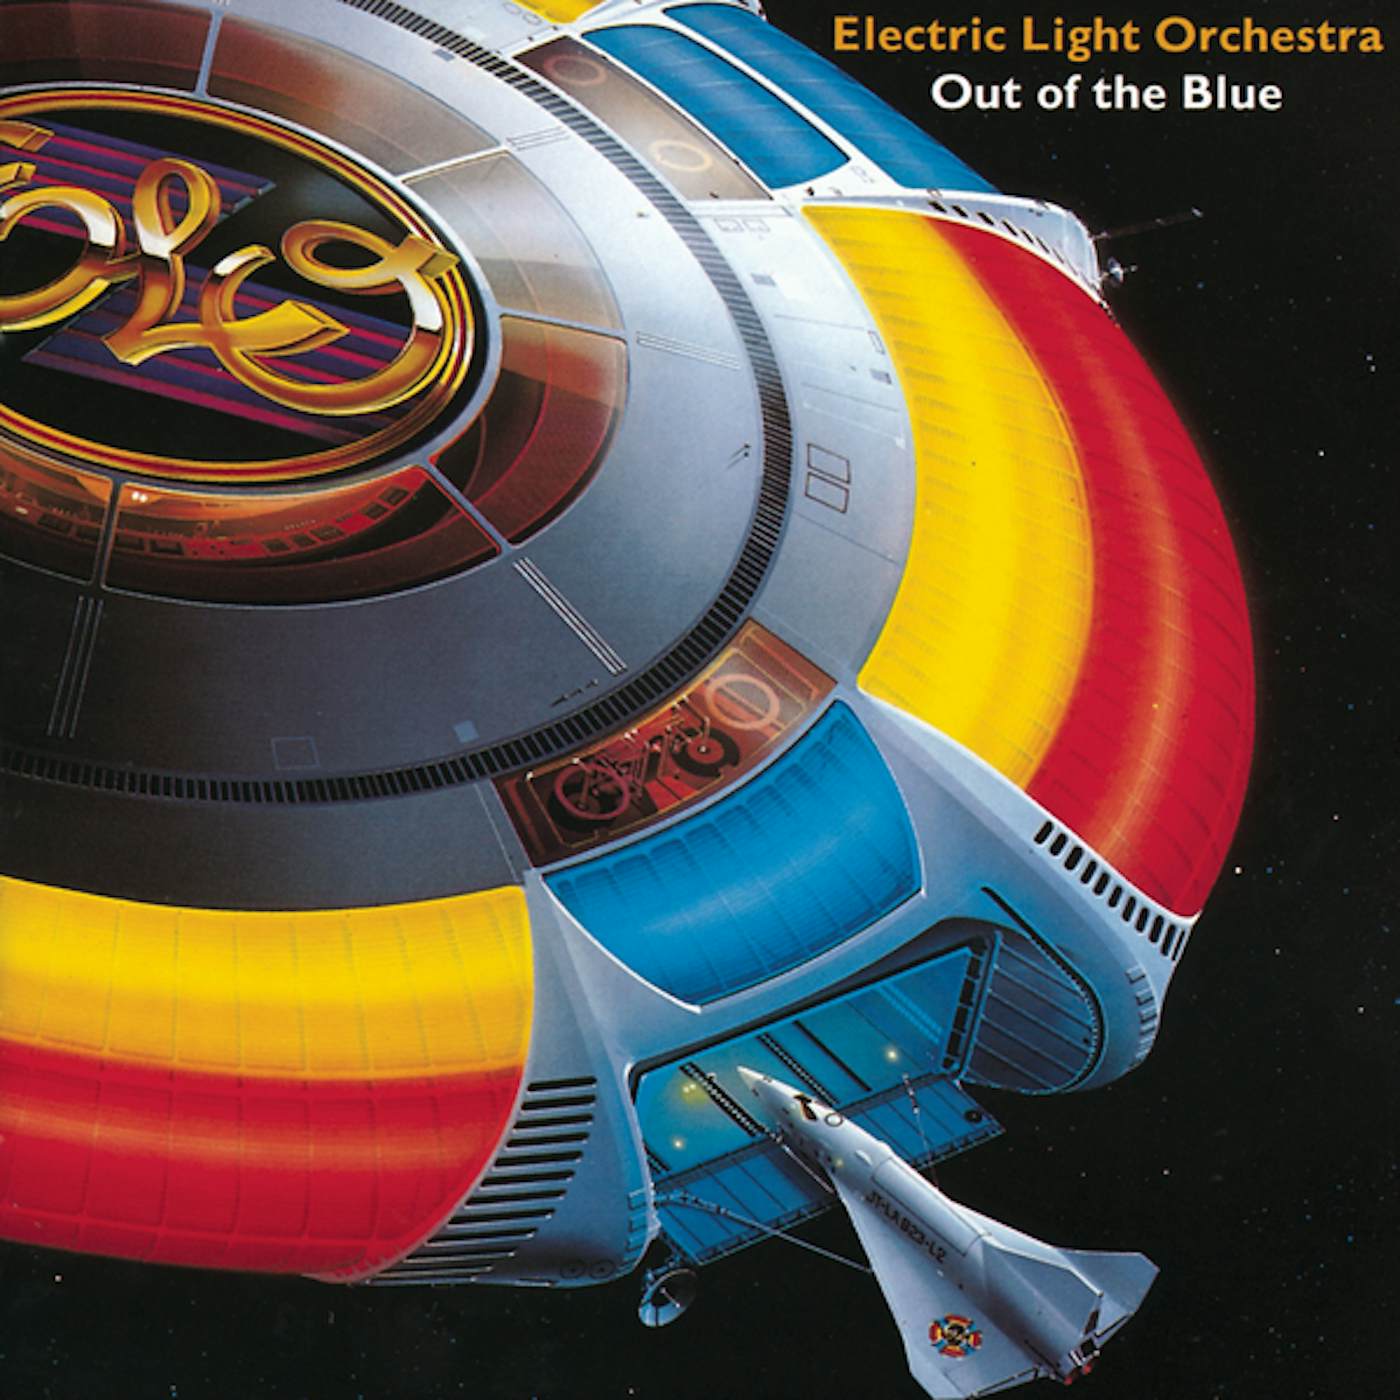 ELO (Electric Light Orchestra) OUT OF THE BLUE CD